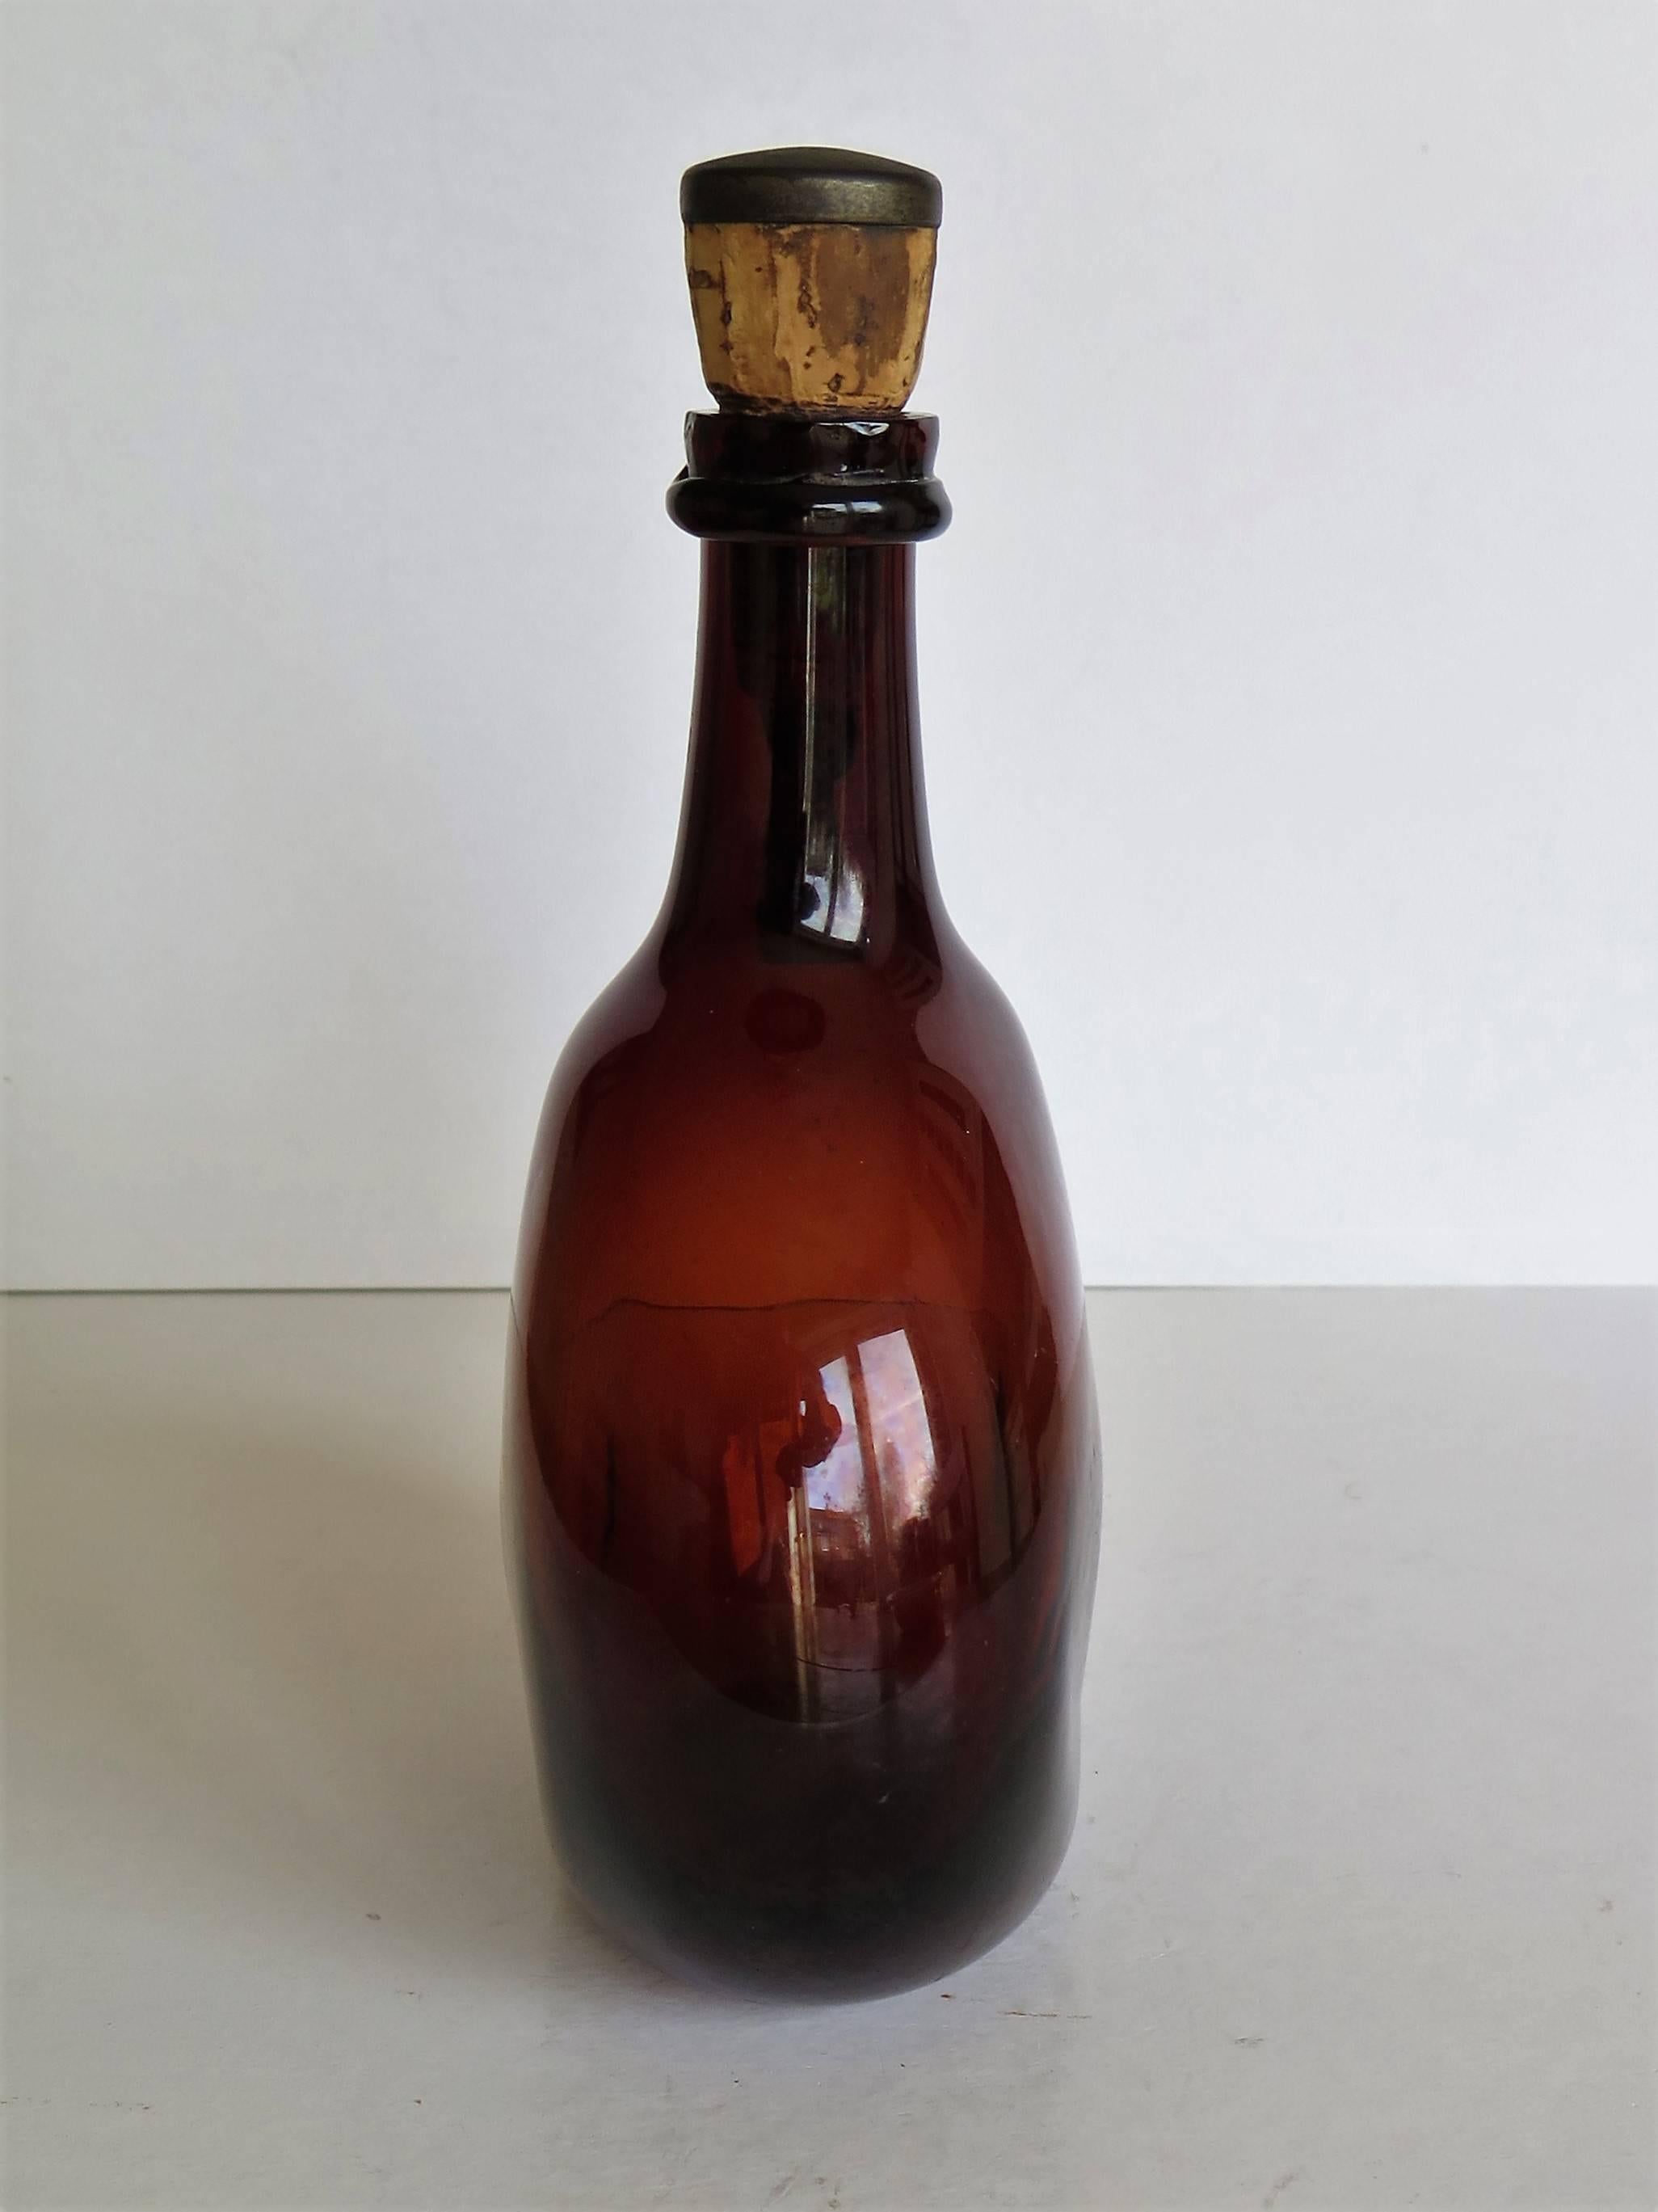 Hand-Crafted Amber Glass Flagon or Jug with Cork and Metal Stopper Handblown, Ca 1825